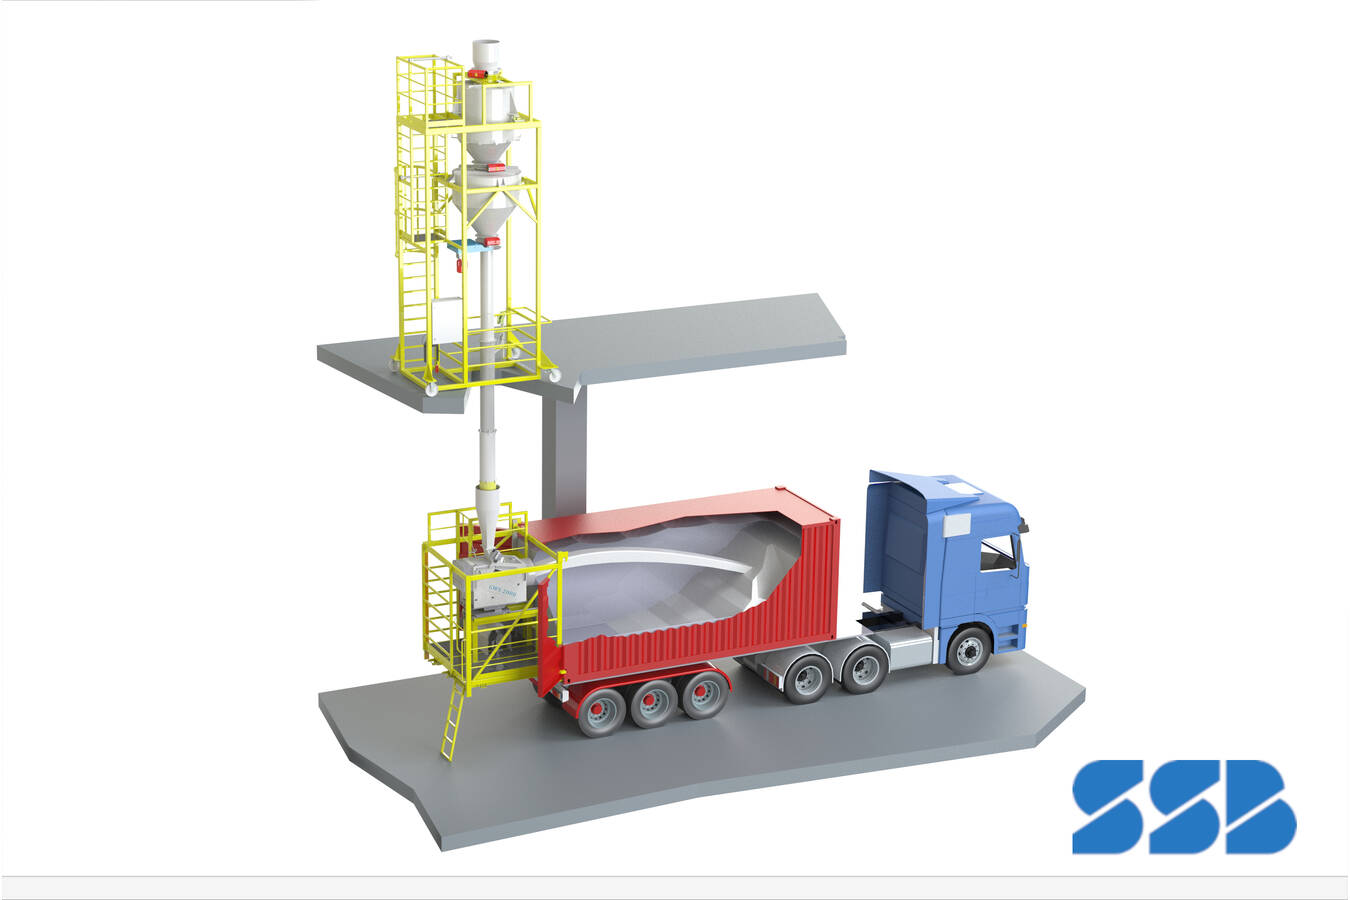 Design variants of Belt thrower GWS2000 of SSB Wägetechnik GmbH The GWS2000 belt thrower is a filling device for rear loading of loose bulk materials into 20 – 40″ containers by means of a conveyor belt, and has several design variants.